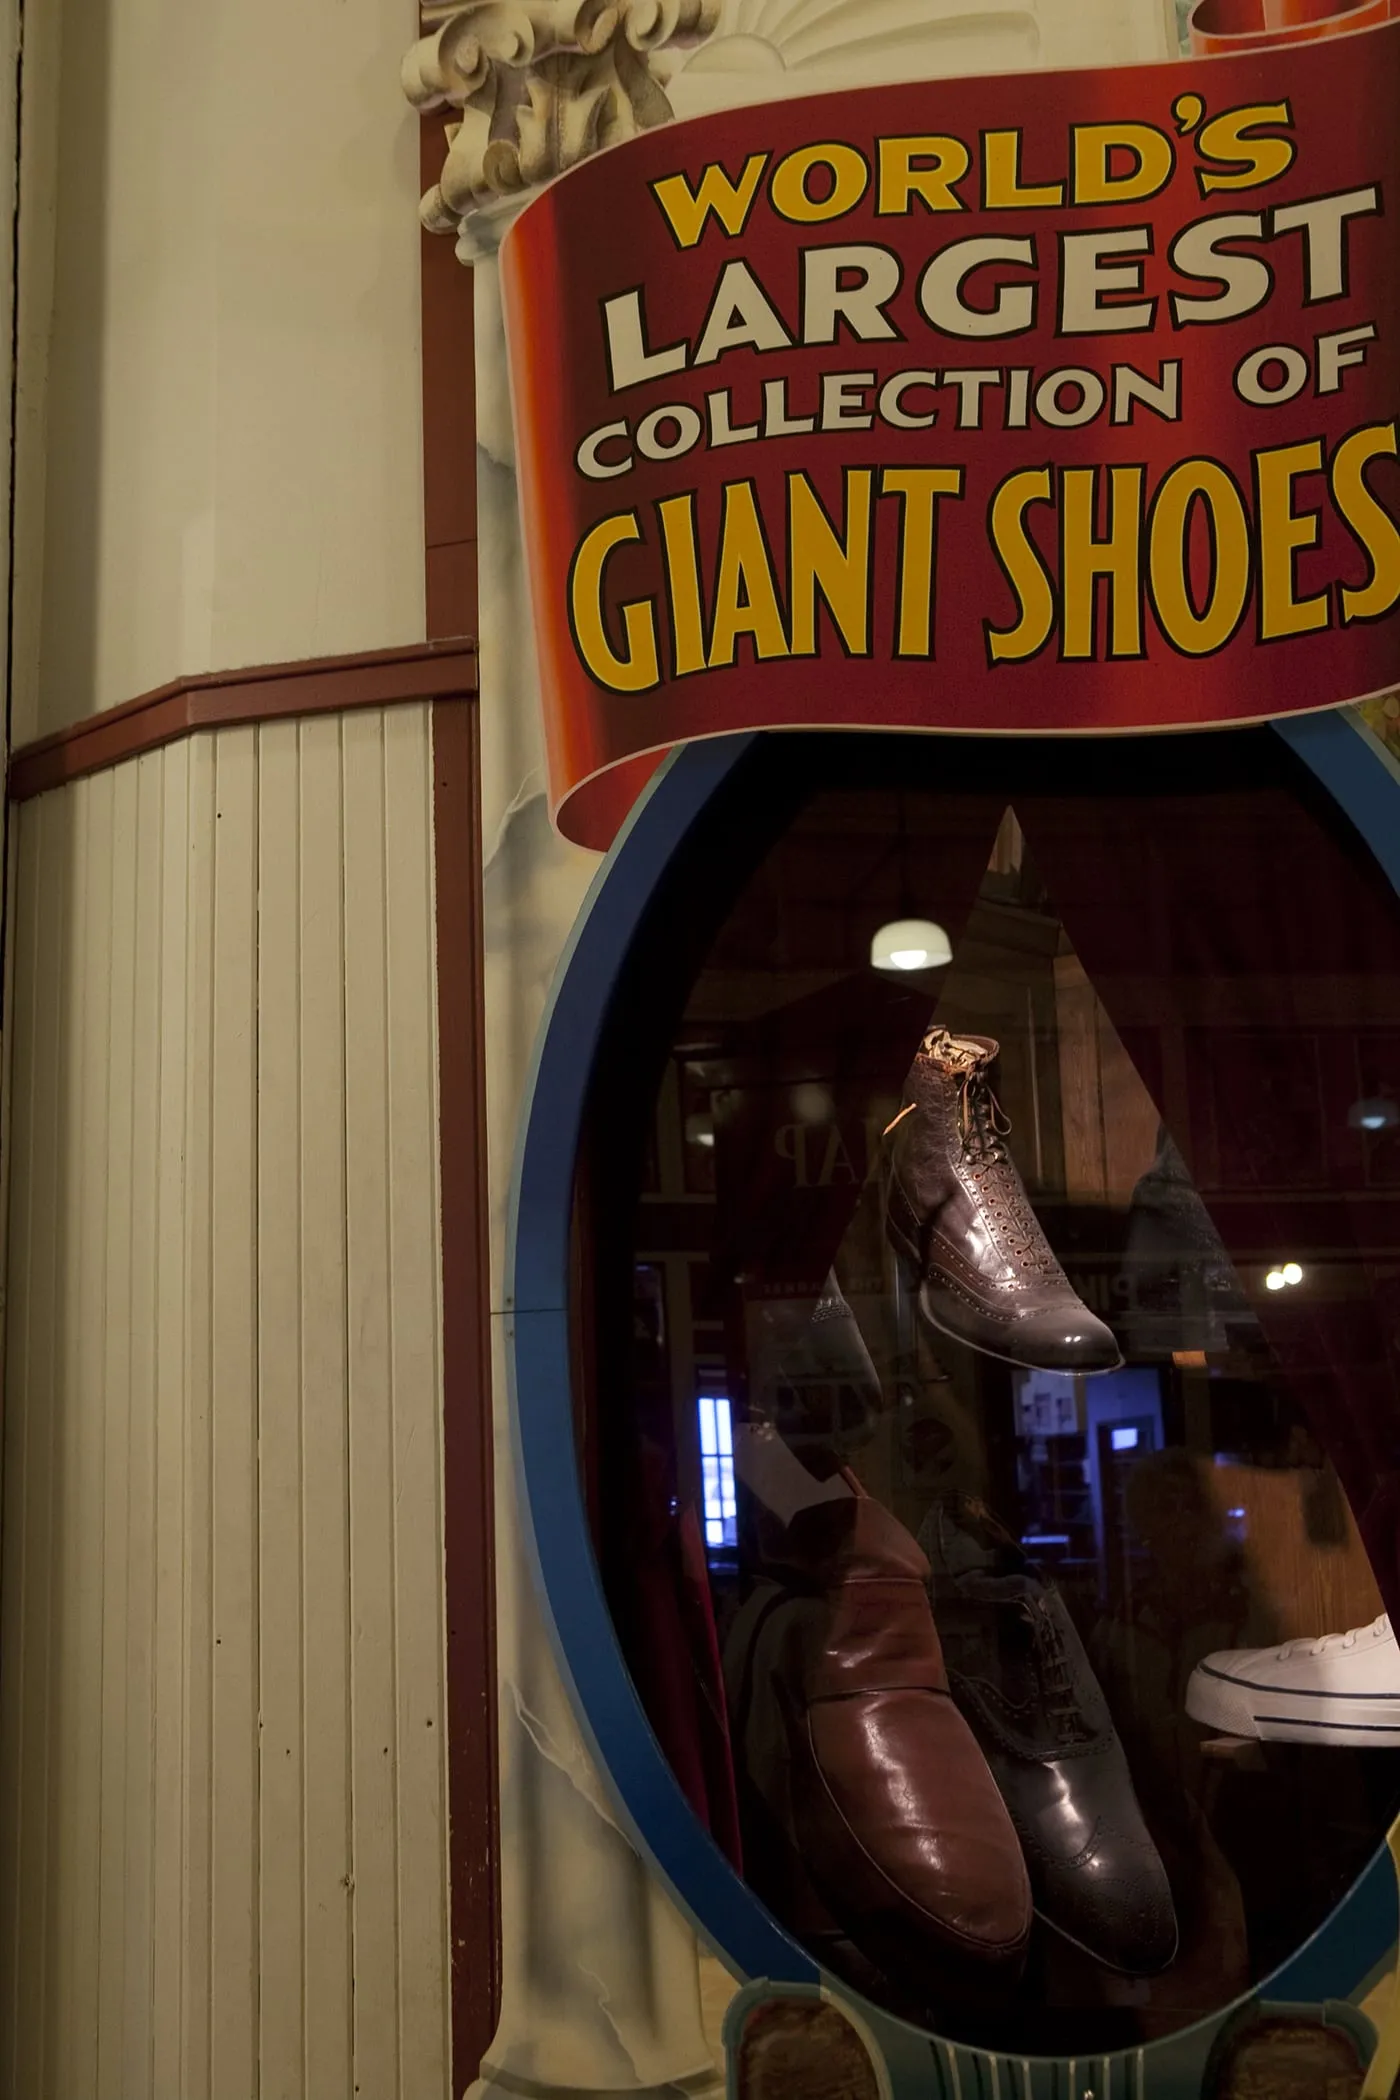 The World's Largest Collection of Giant Shoes at The World Famous Giant Shoe Museum in Pike Place Market in Seattle, Washington.